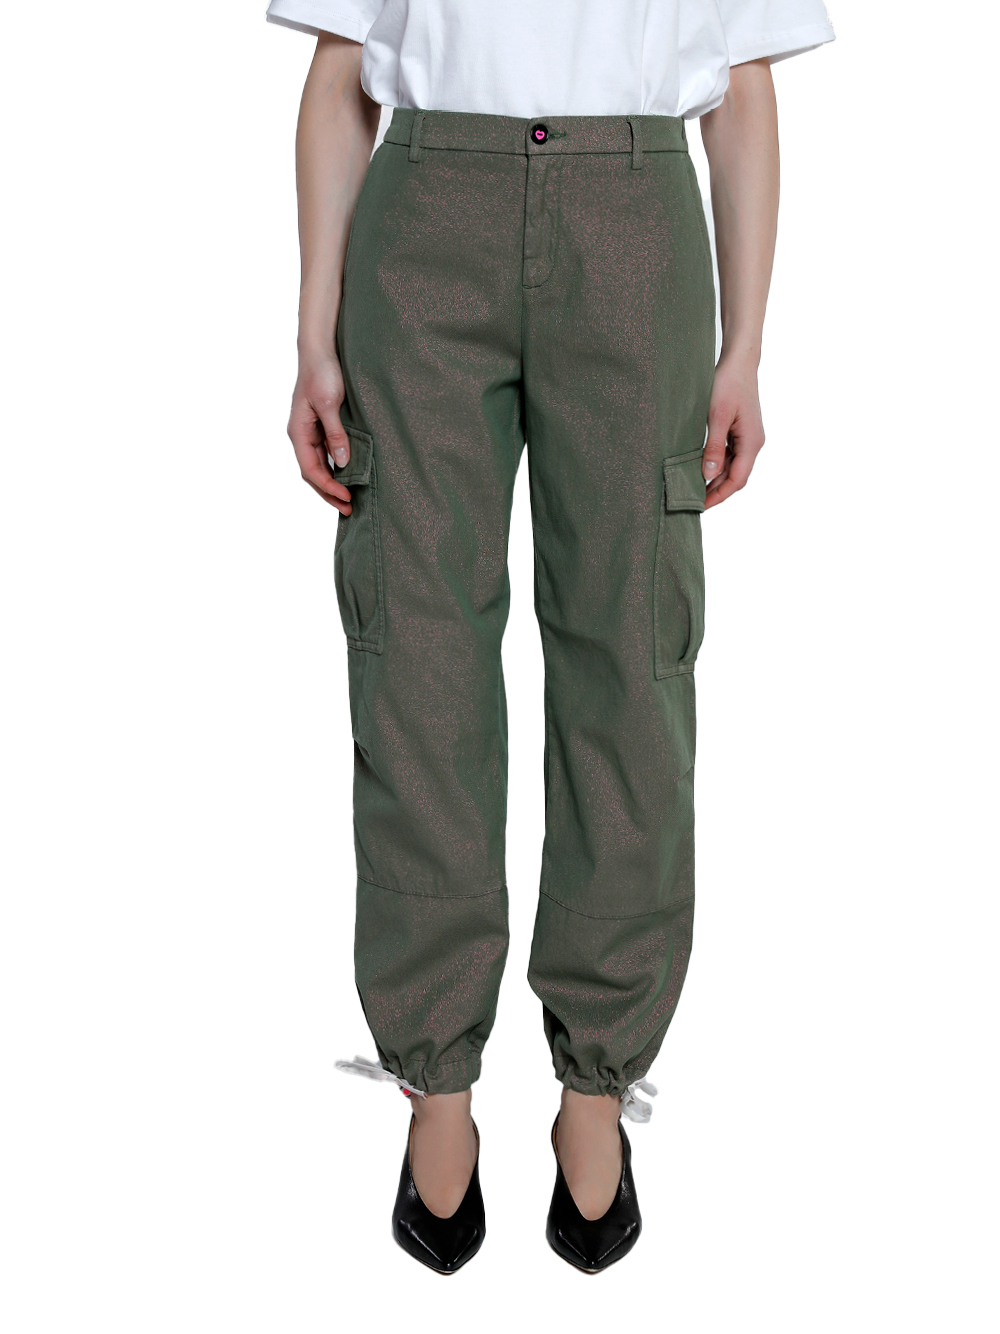 I Love My Pants I LOVE MY PANTS- Cotton Cargo Trousers